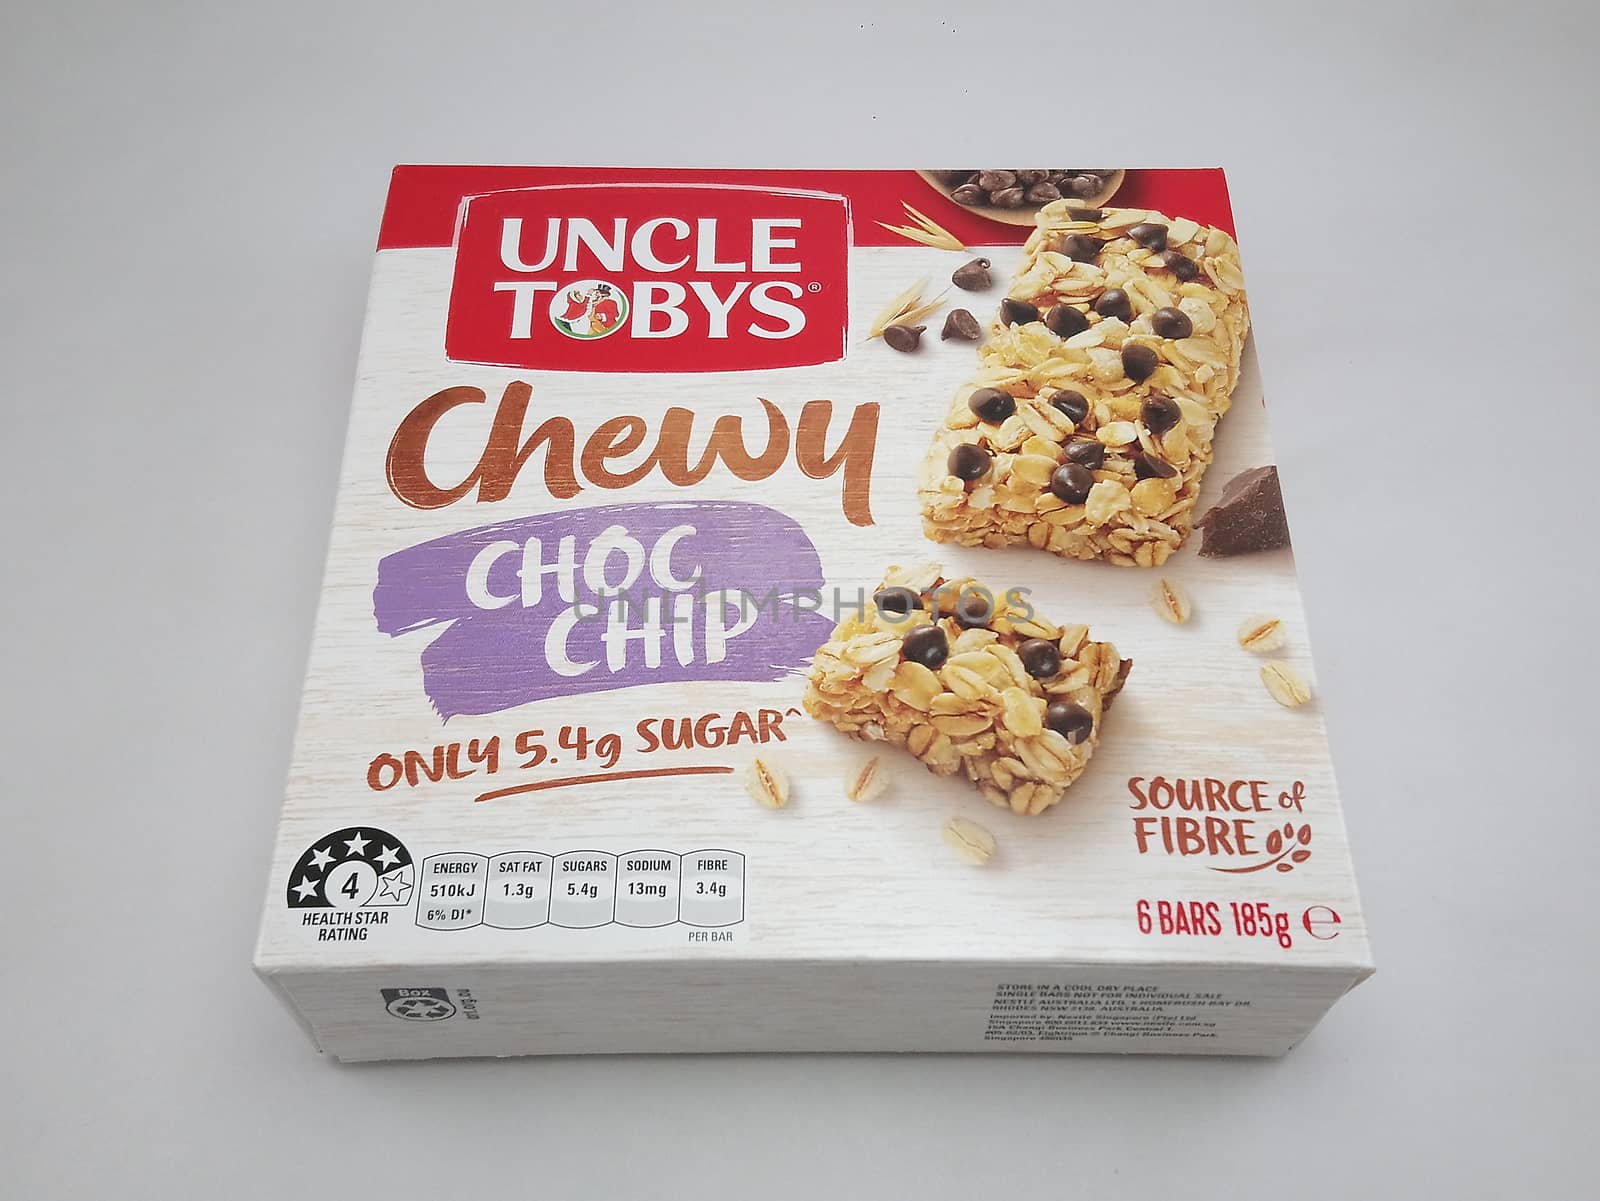 Uncle tobys chewy choc chip fiber bar in Manila, Philippines by imwaltersy